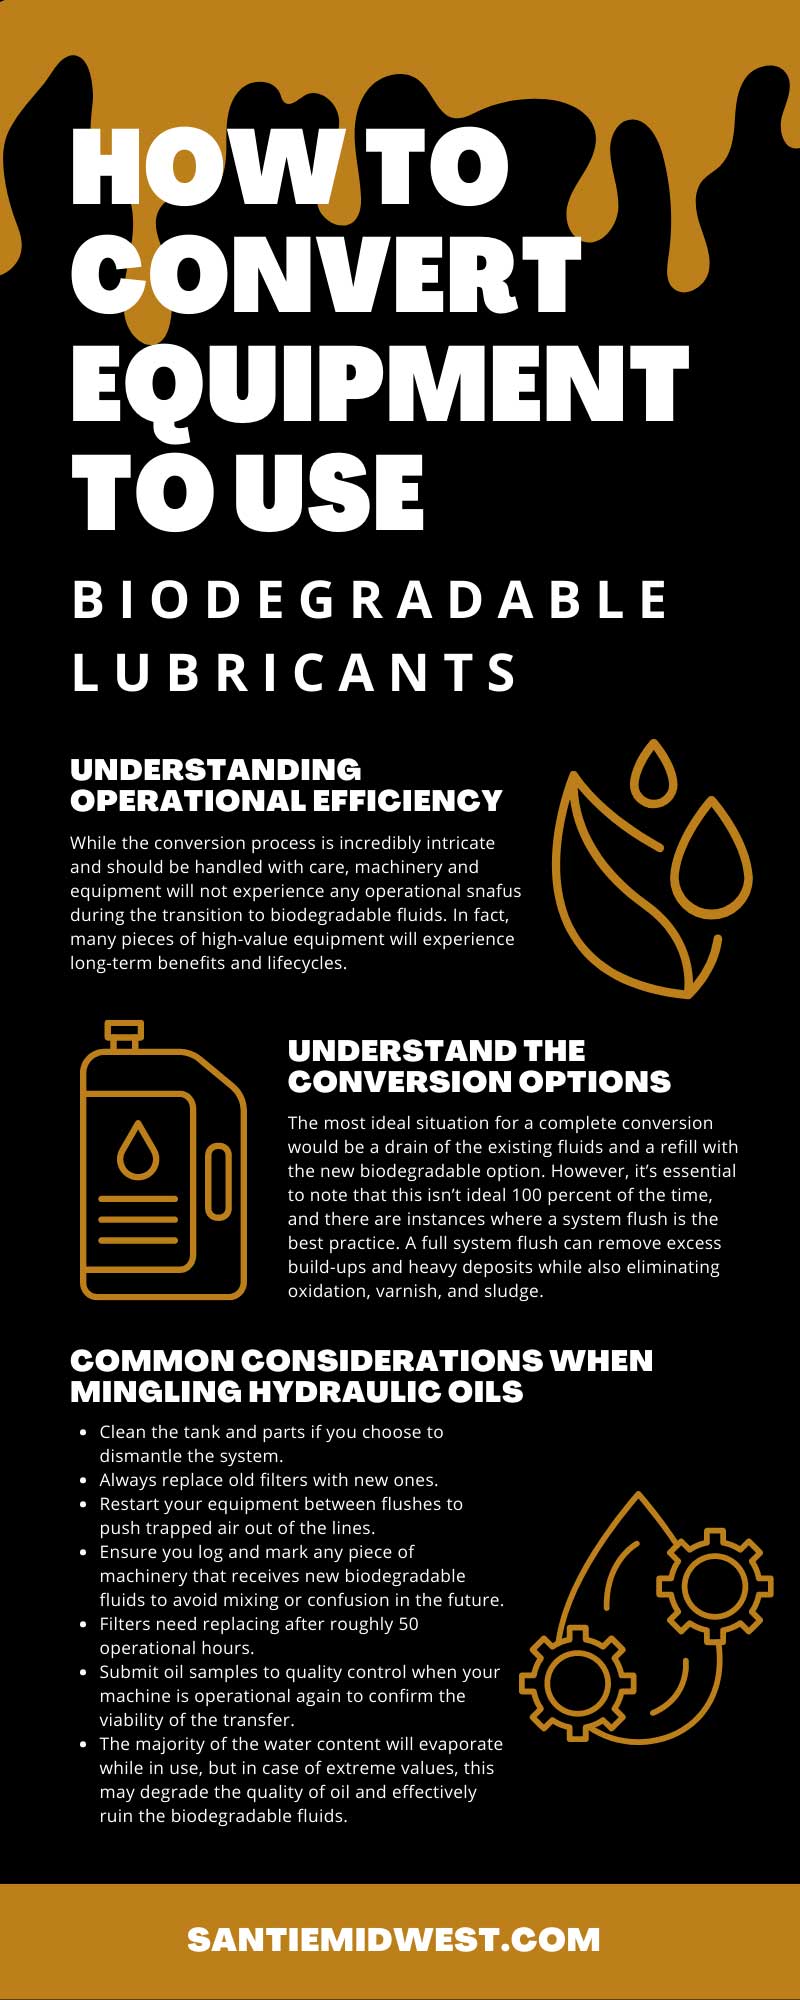 How To Convert Equipment To Use Biodegradable Lubricants